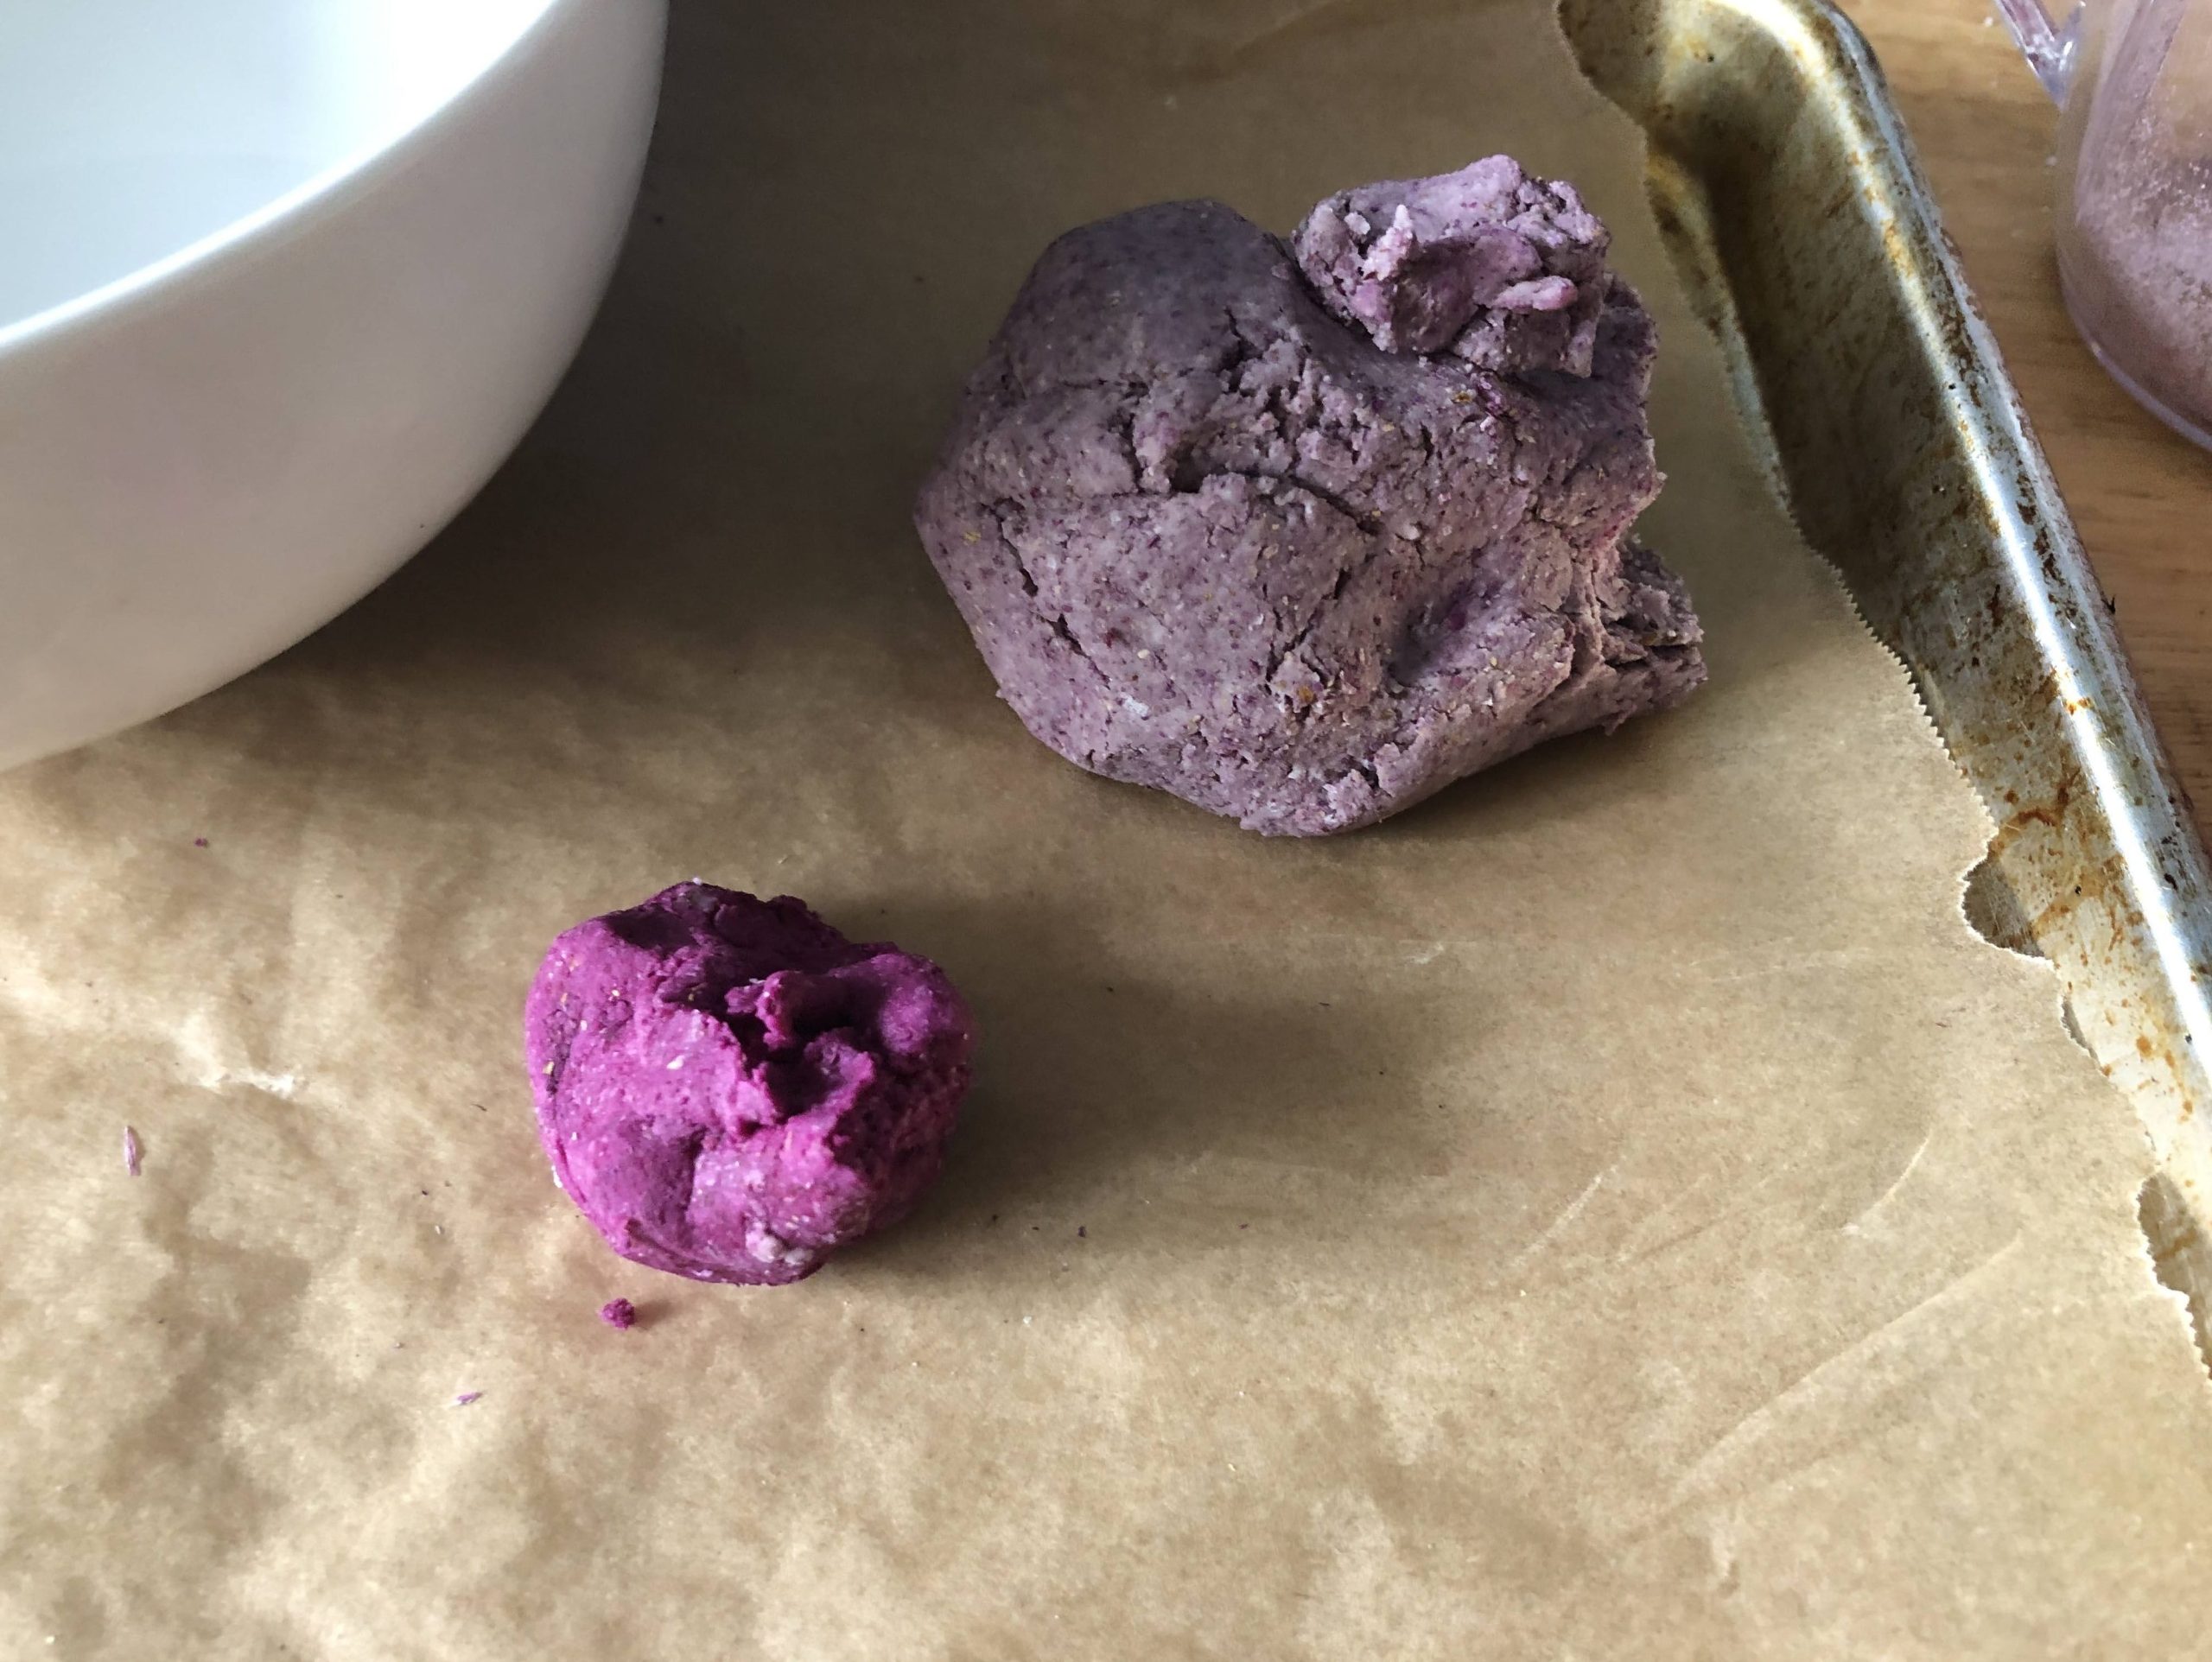 a small hunk of bright purple clay and a larger hunk of a muted gray/purple clay.